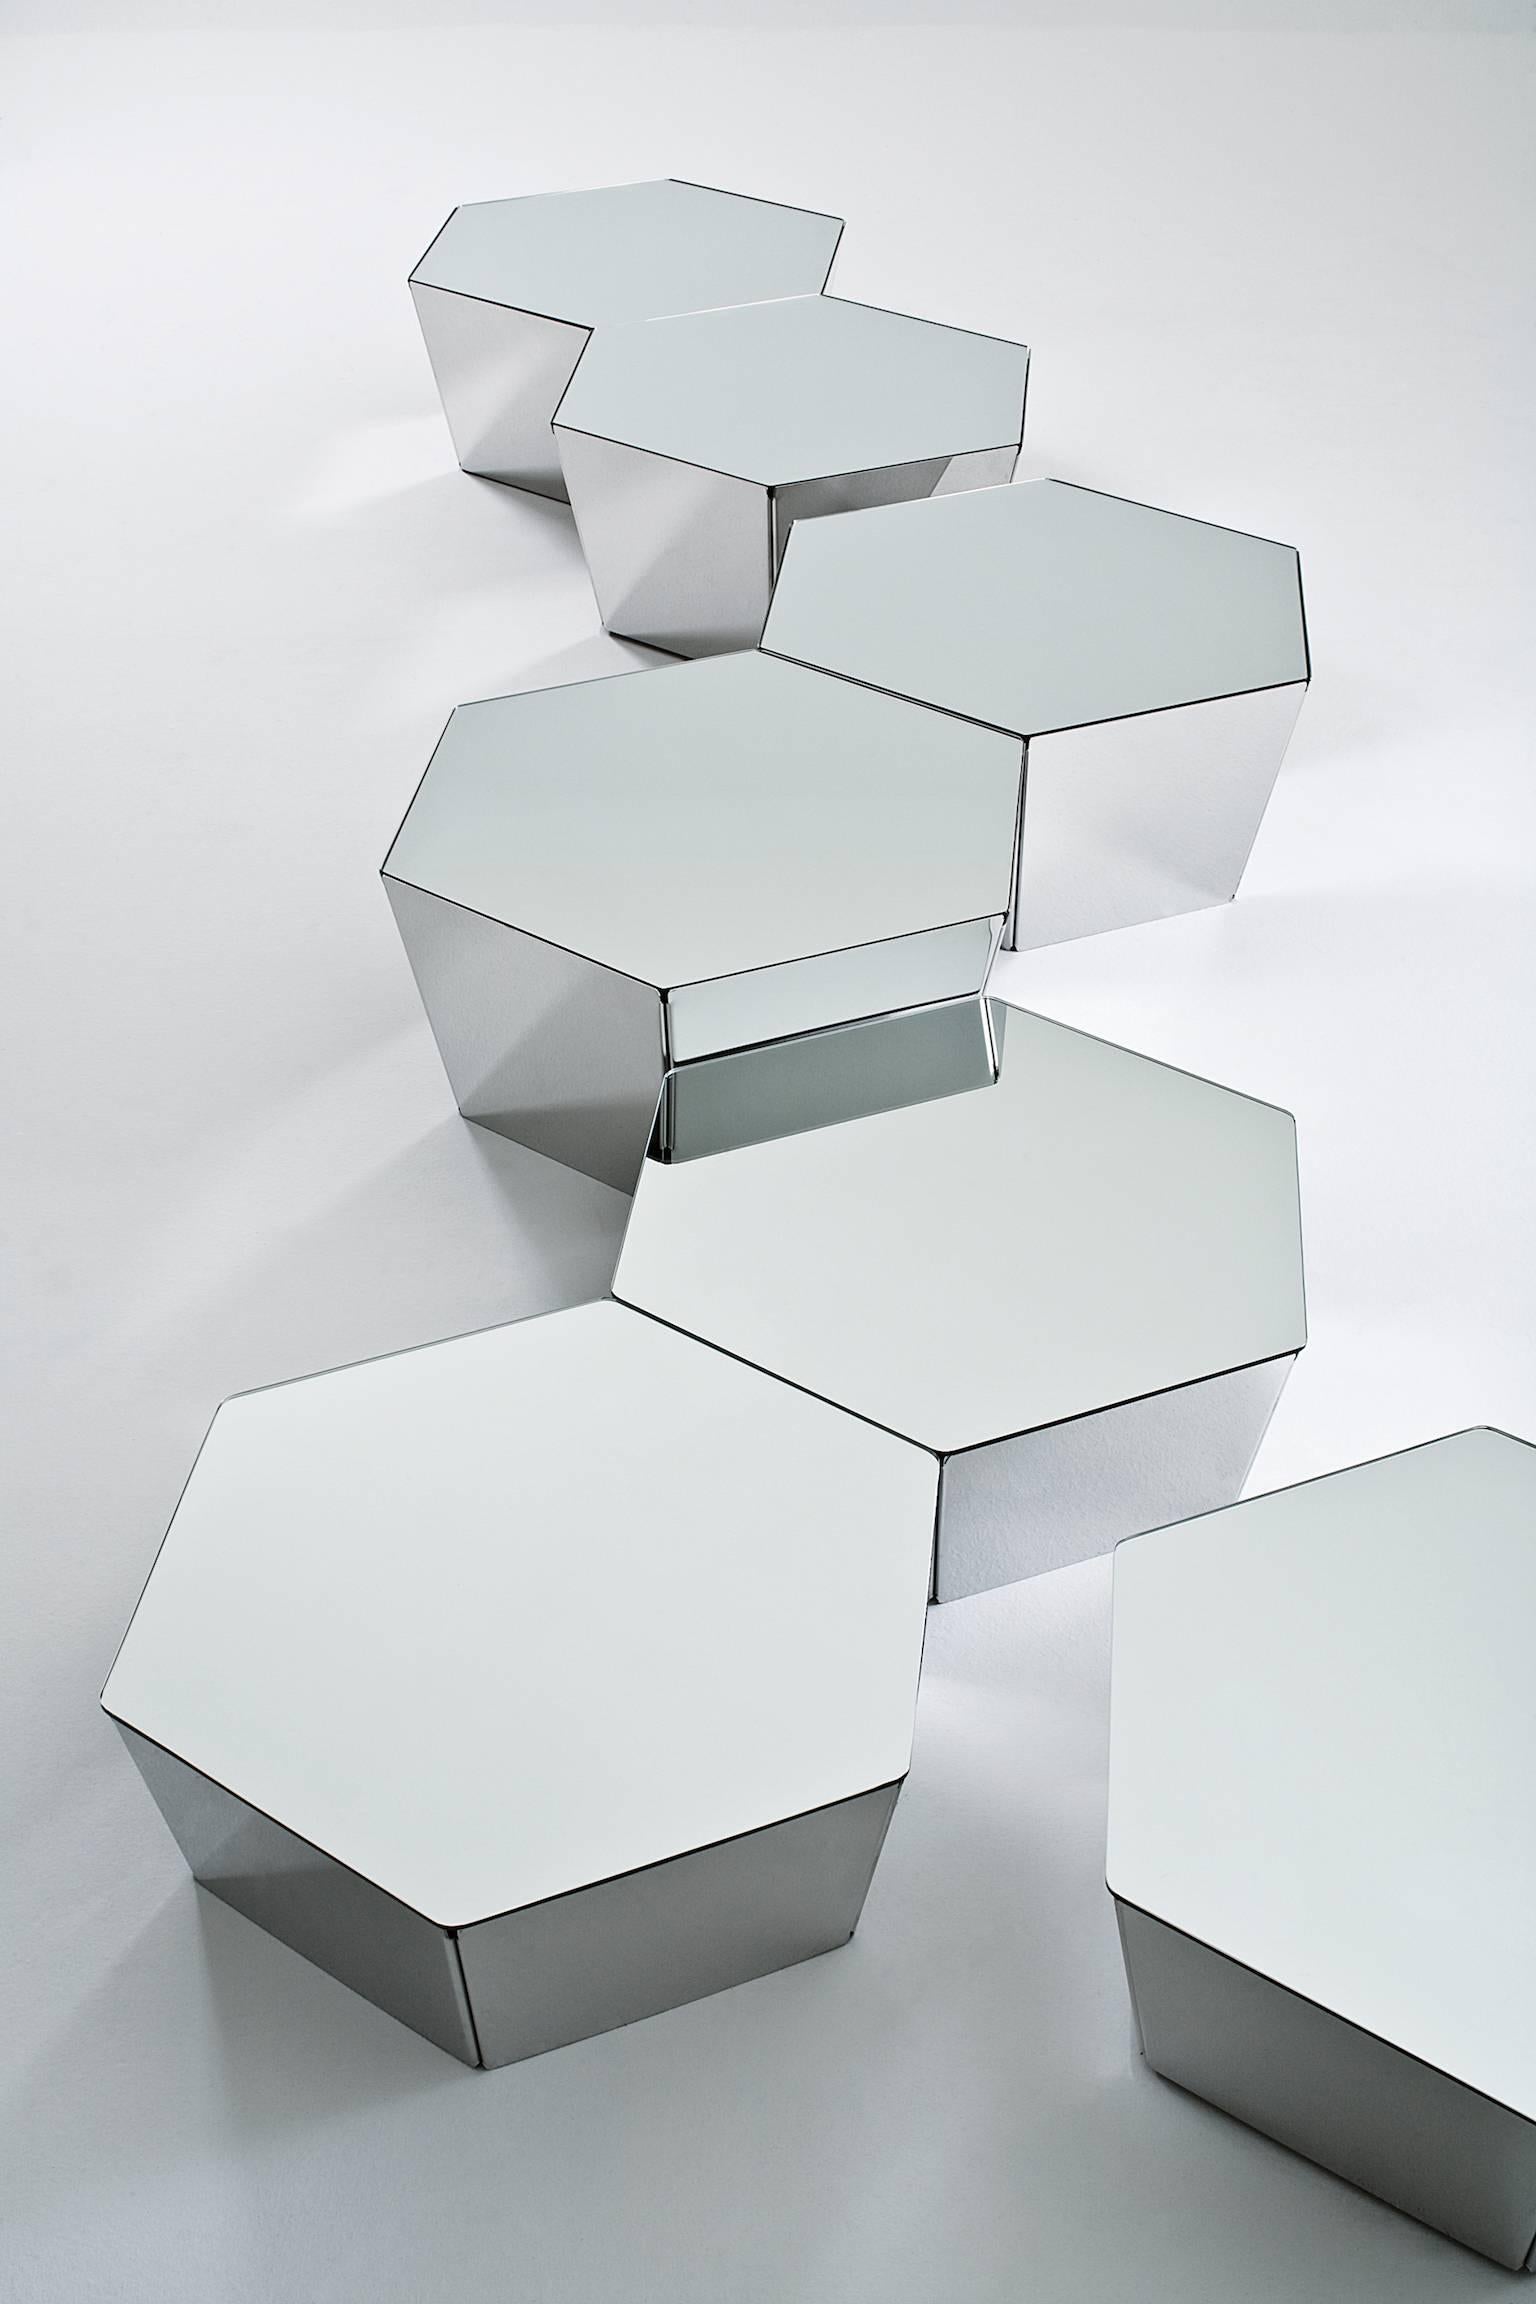 Coffee table to be placed side by side, with hexagonal conic metal base available in different versions: A: “supermirror” bright stainless steel structure with mirrored glass top. B: Embossed white lacquered metal structure and bright white painted